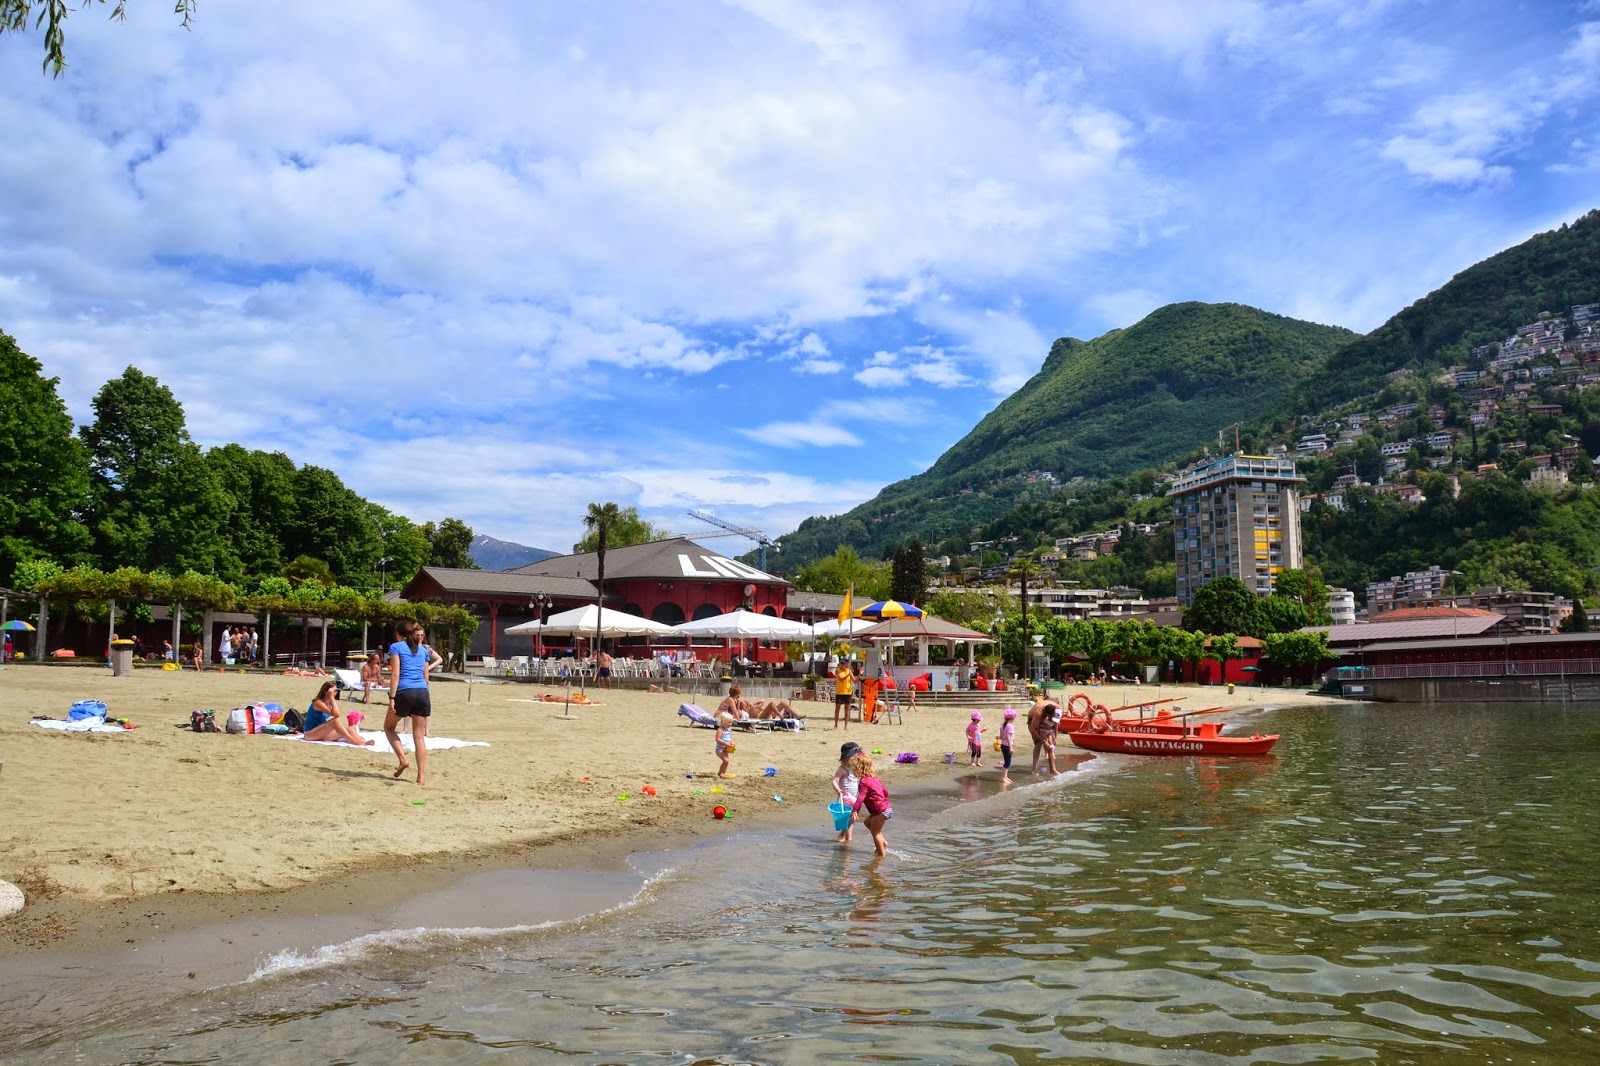 Swiss Family Dilloughery: A Day at the Beach - Lugano Lido (May 10, 2014)